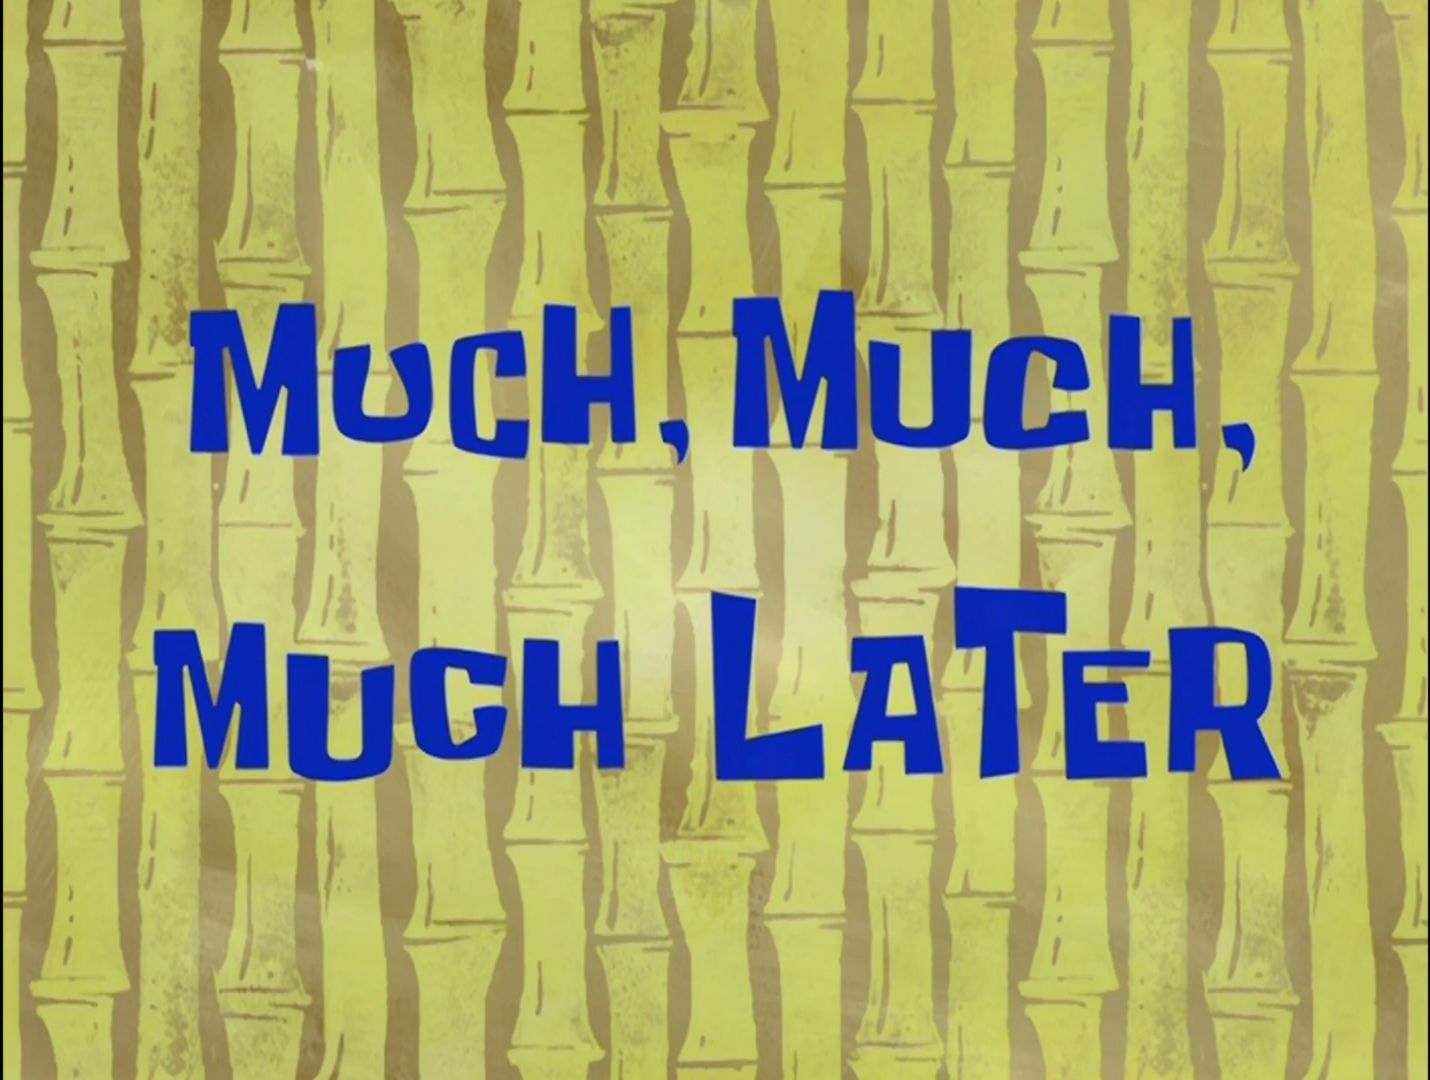 13 Stages Of Studying For A Test As Described By Spongebob Squarepants